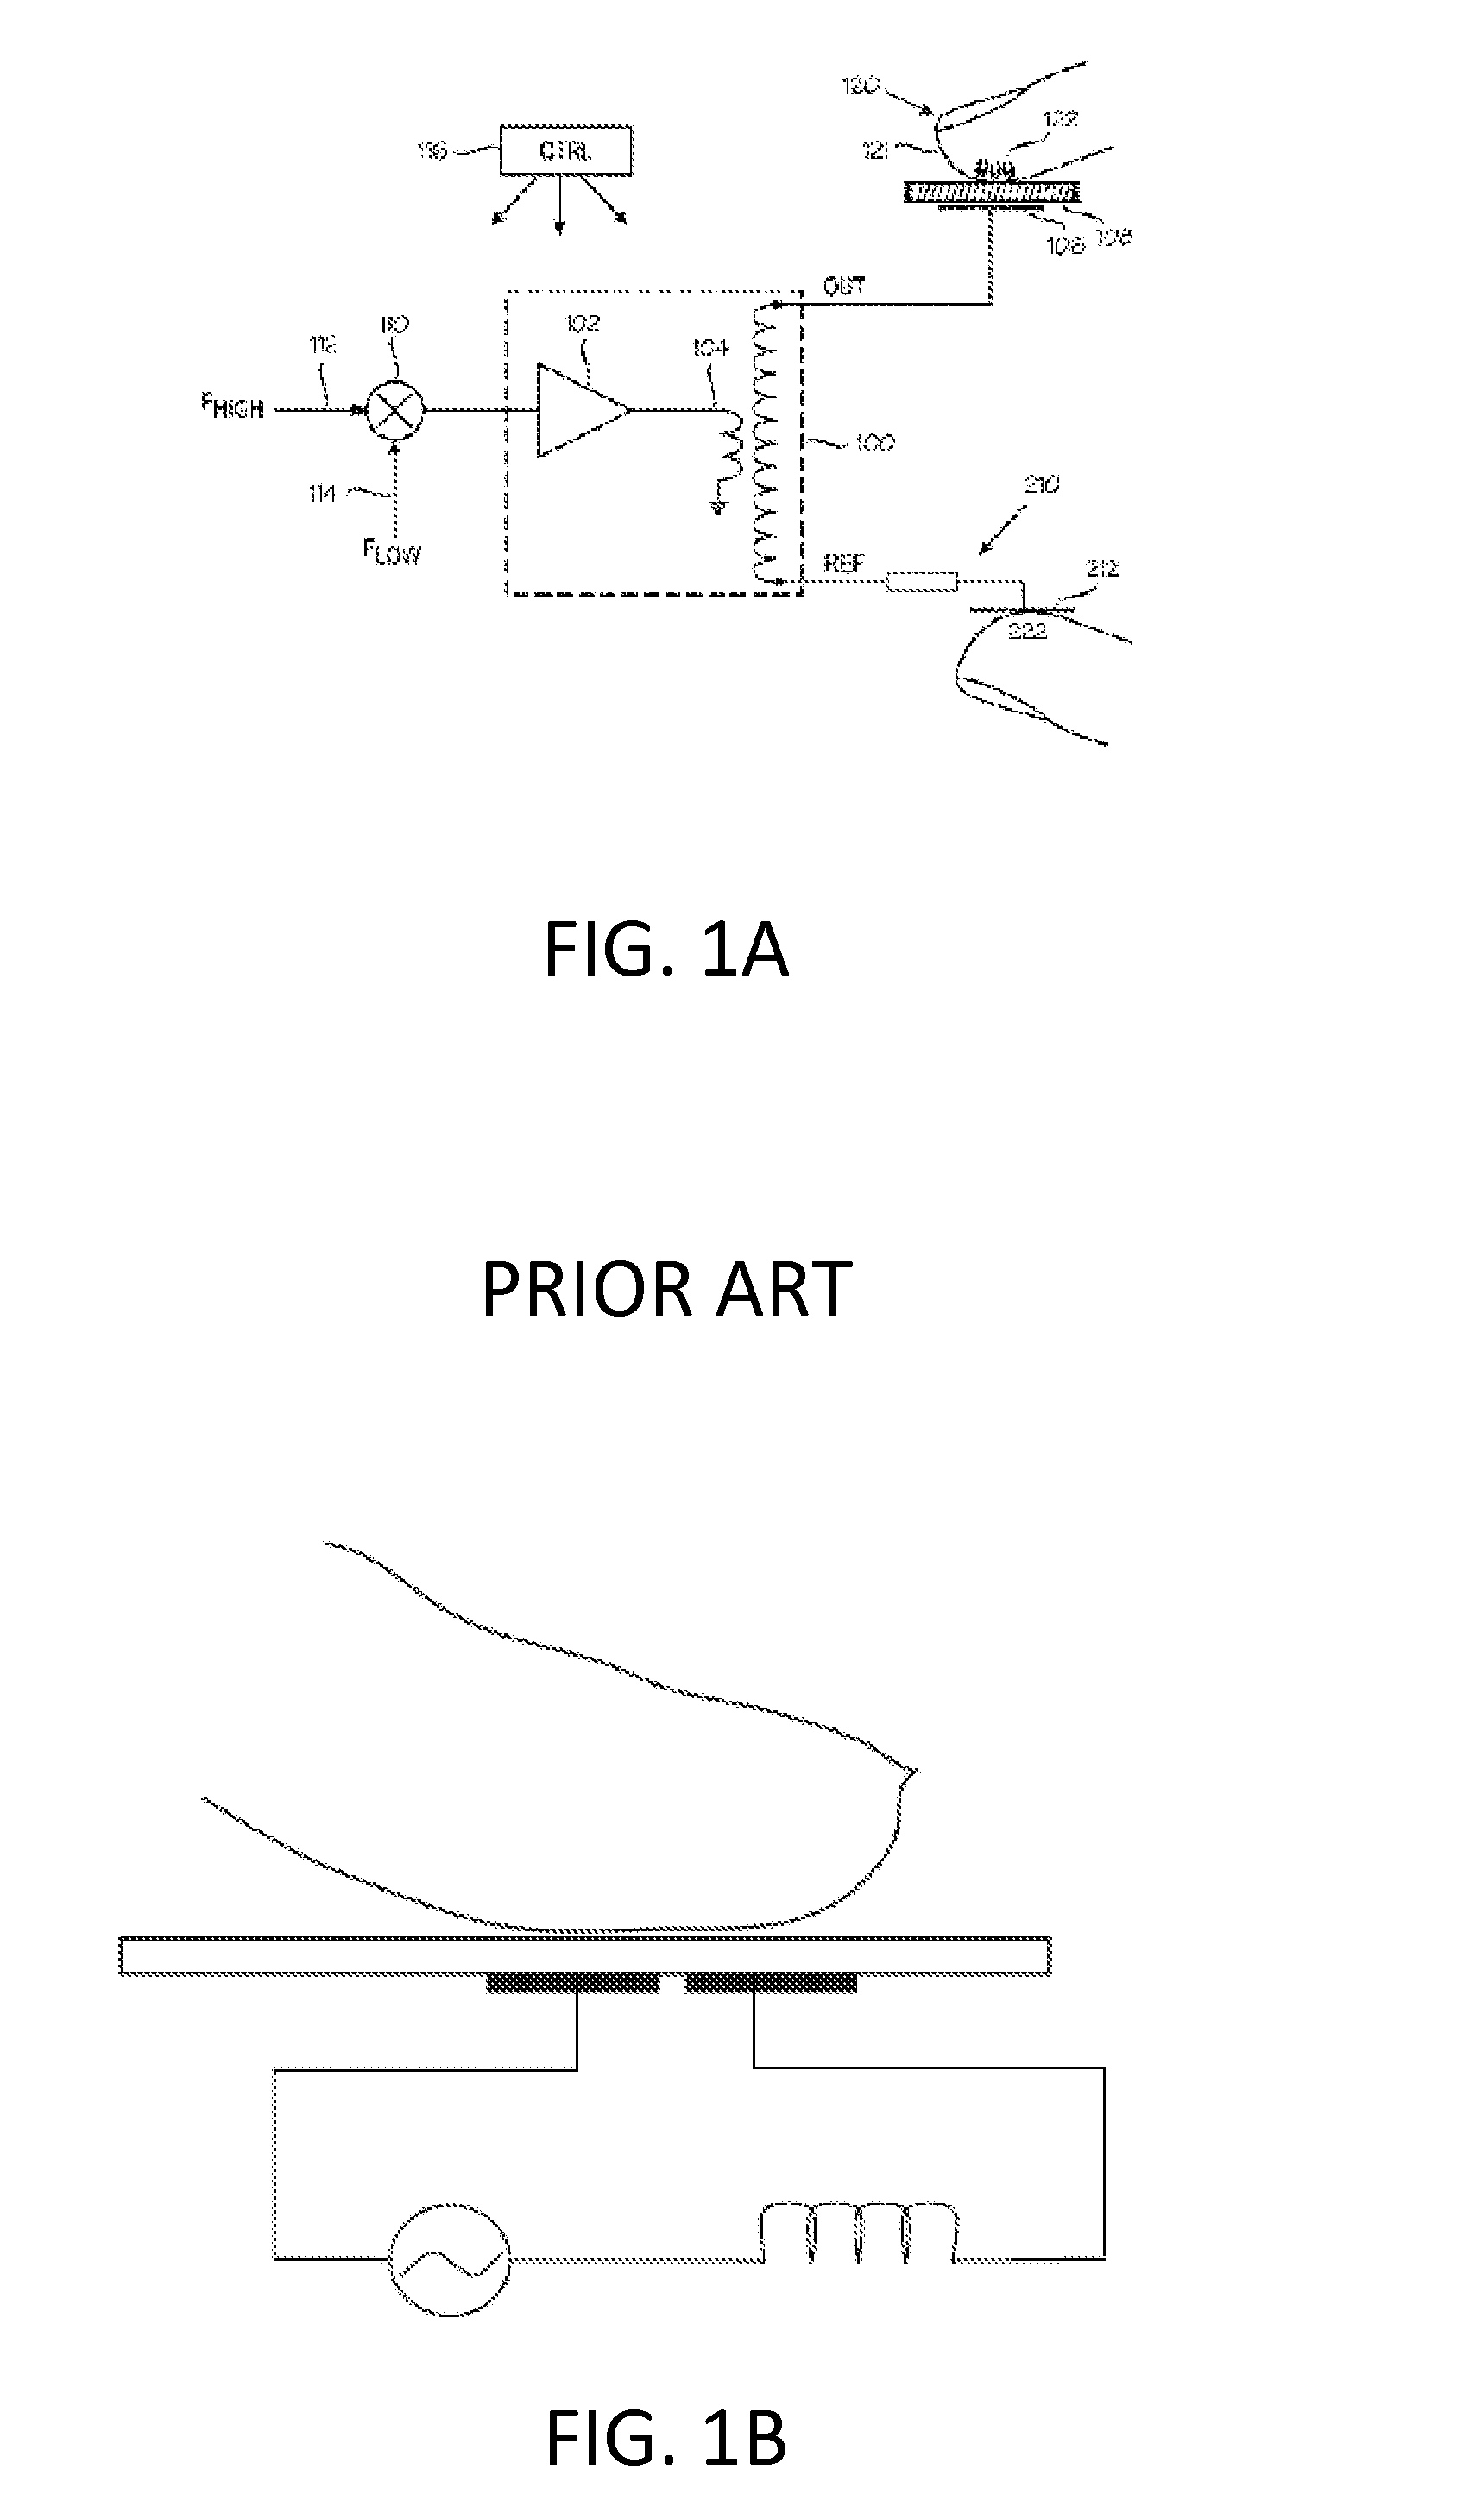 Materials and structures for haptic displays with simultaneous sensing and actuation